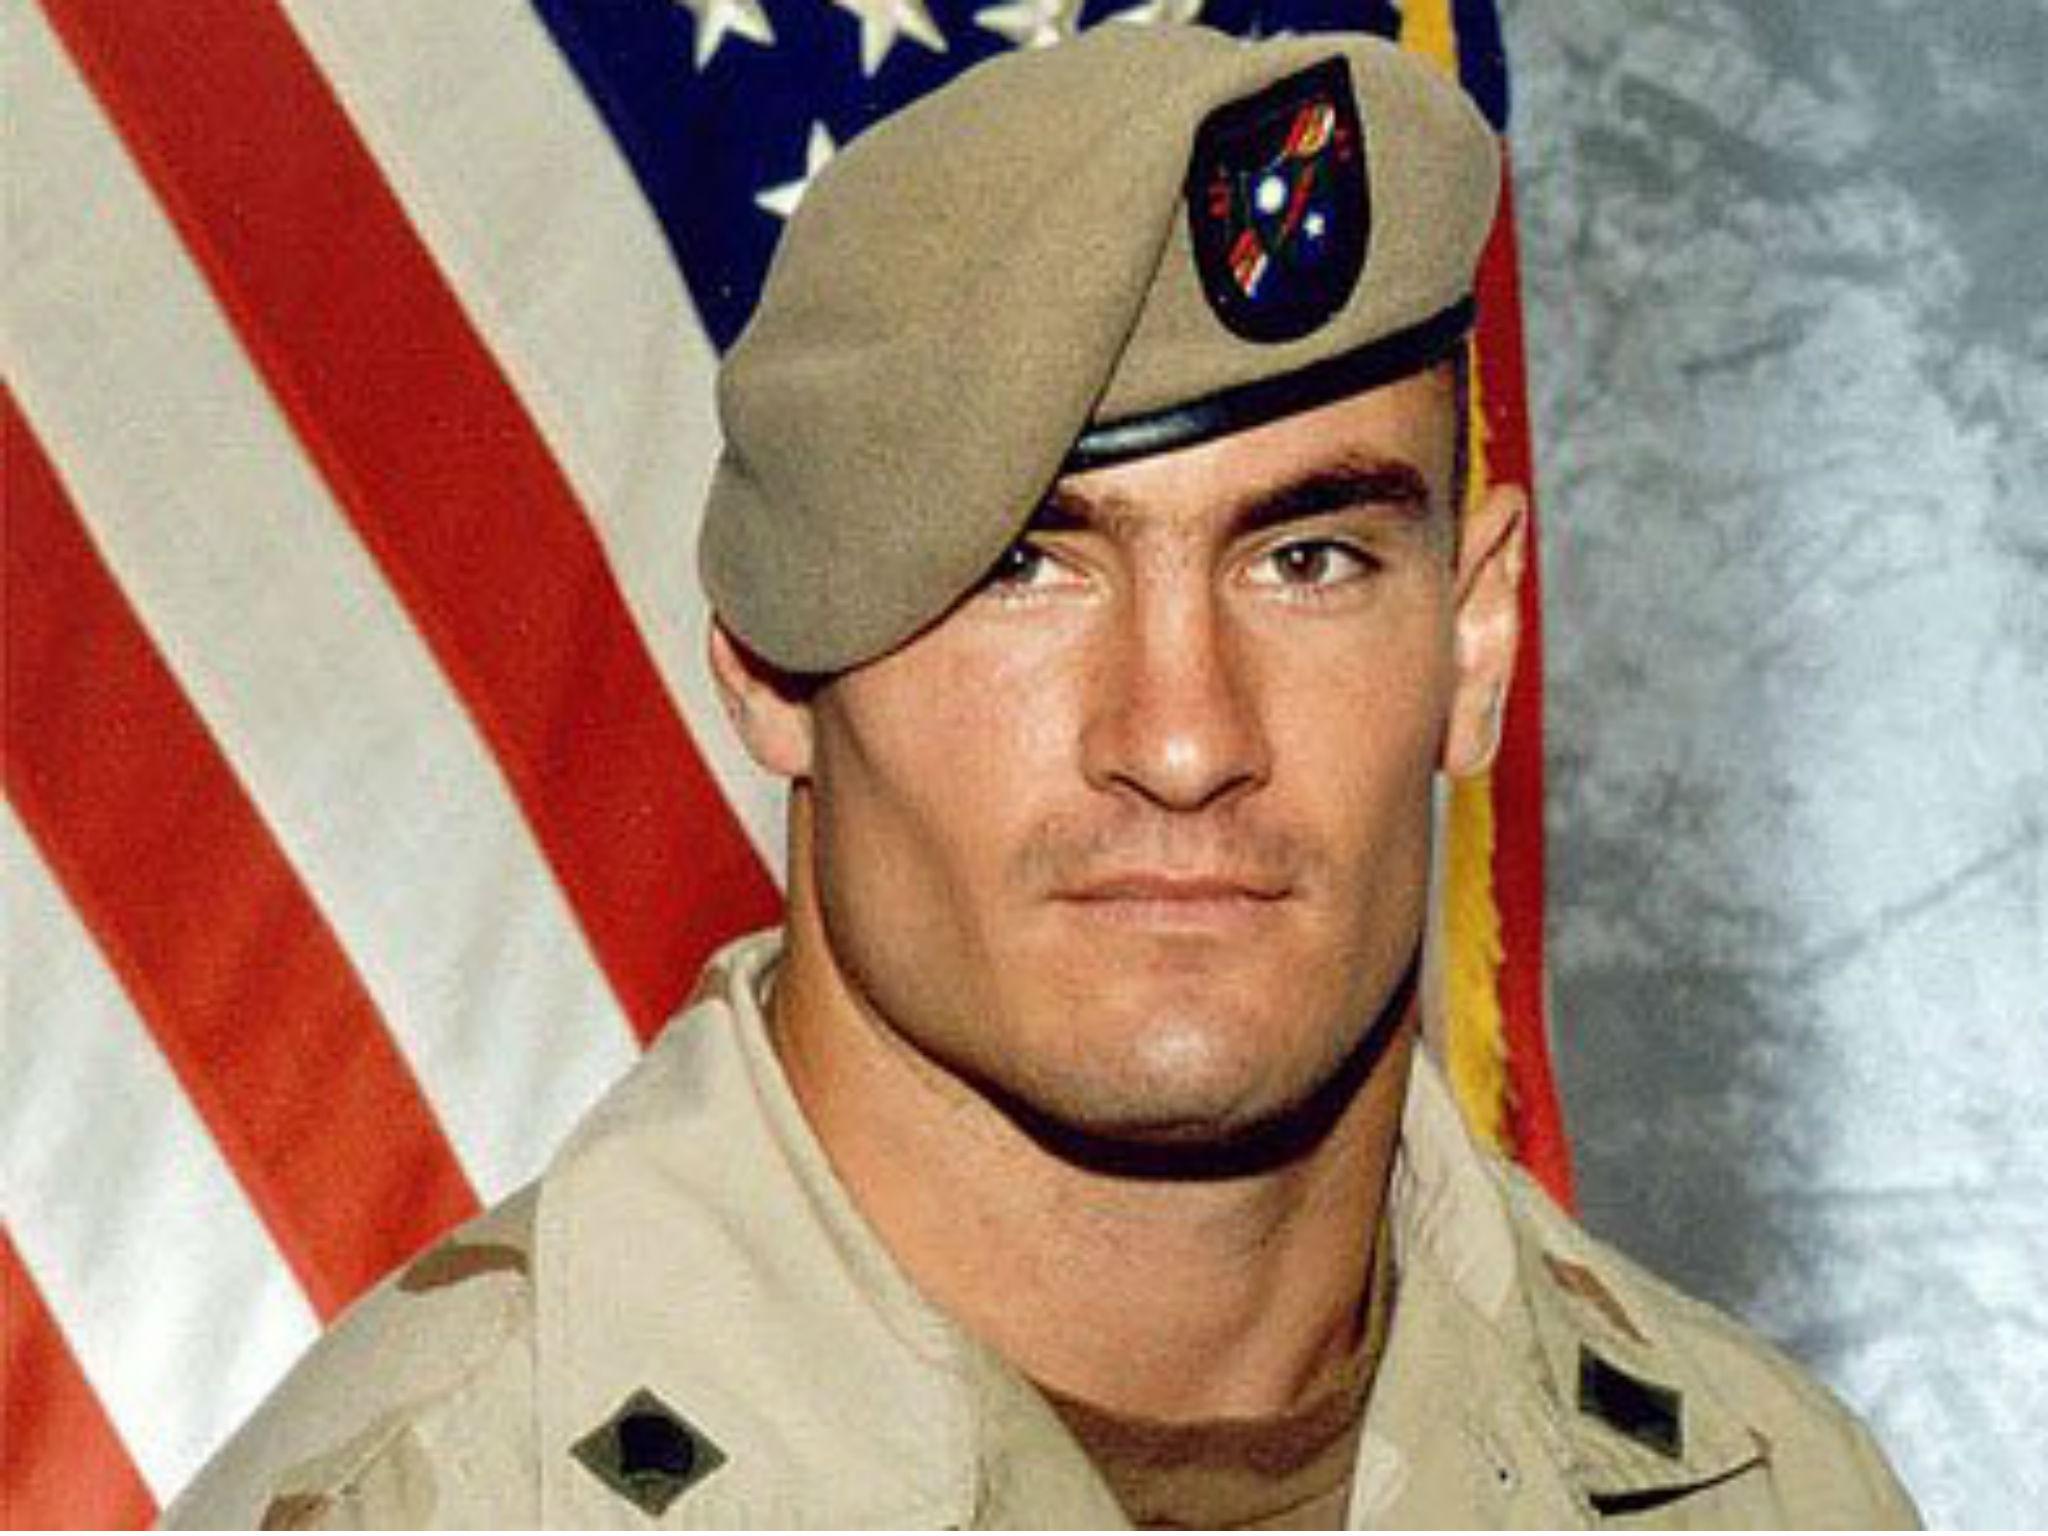 The award is named after Pat Tillman, who joined the US army after leaving his American football career